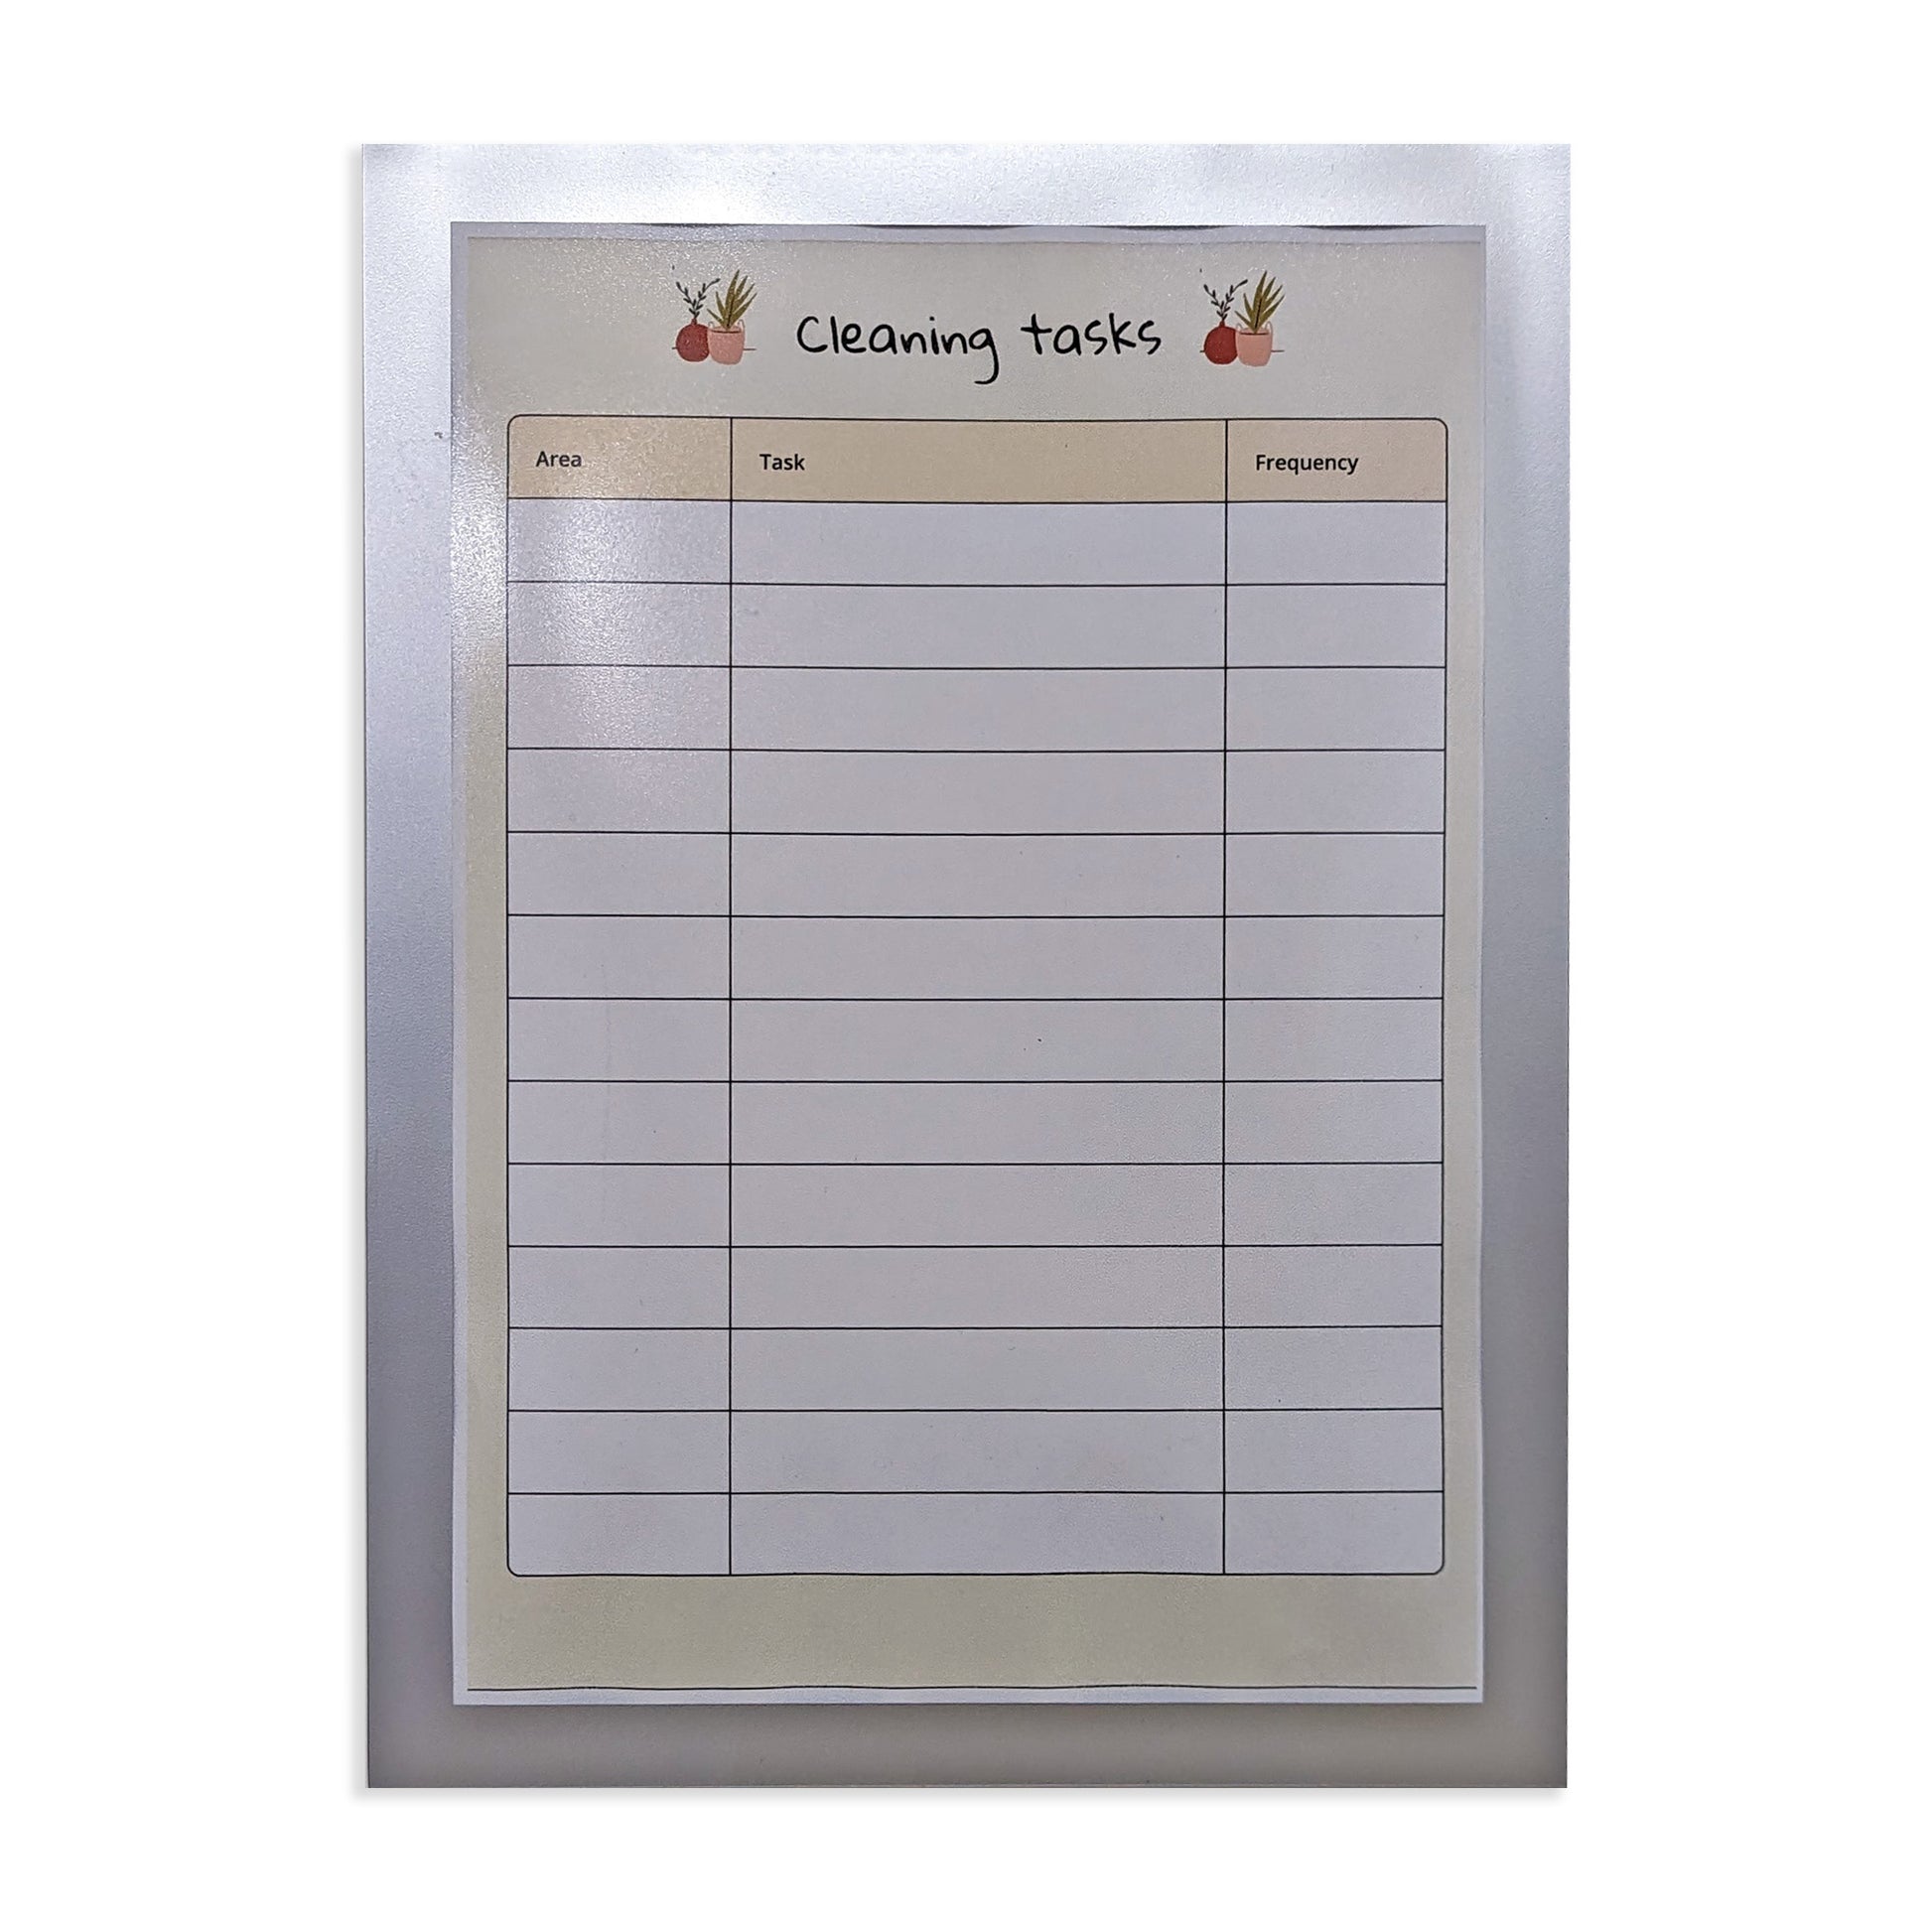 An A4 self-adhesive magnetic display frame mounted on a wall, containing a poster titled 'CLEANING TASKS', highlighting the frame's versatility for use at home or in an office or retail environment.